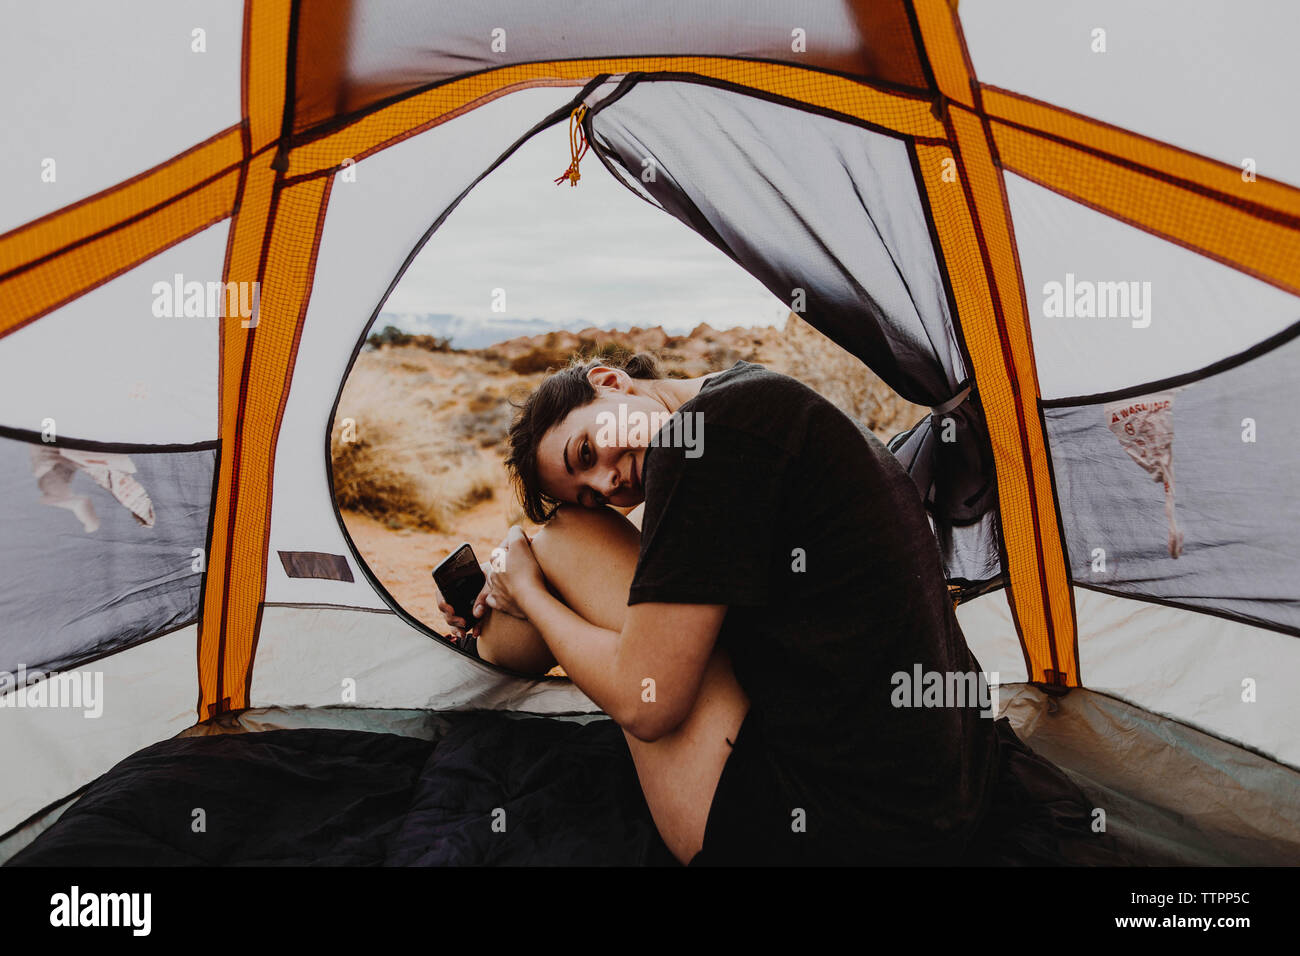 Portrait of woman sitting in tent Stock Photo